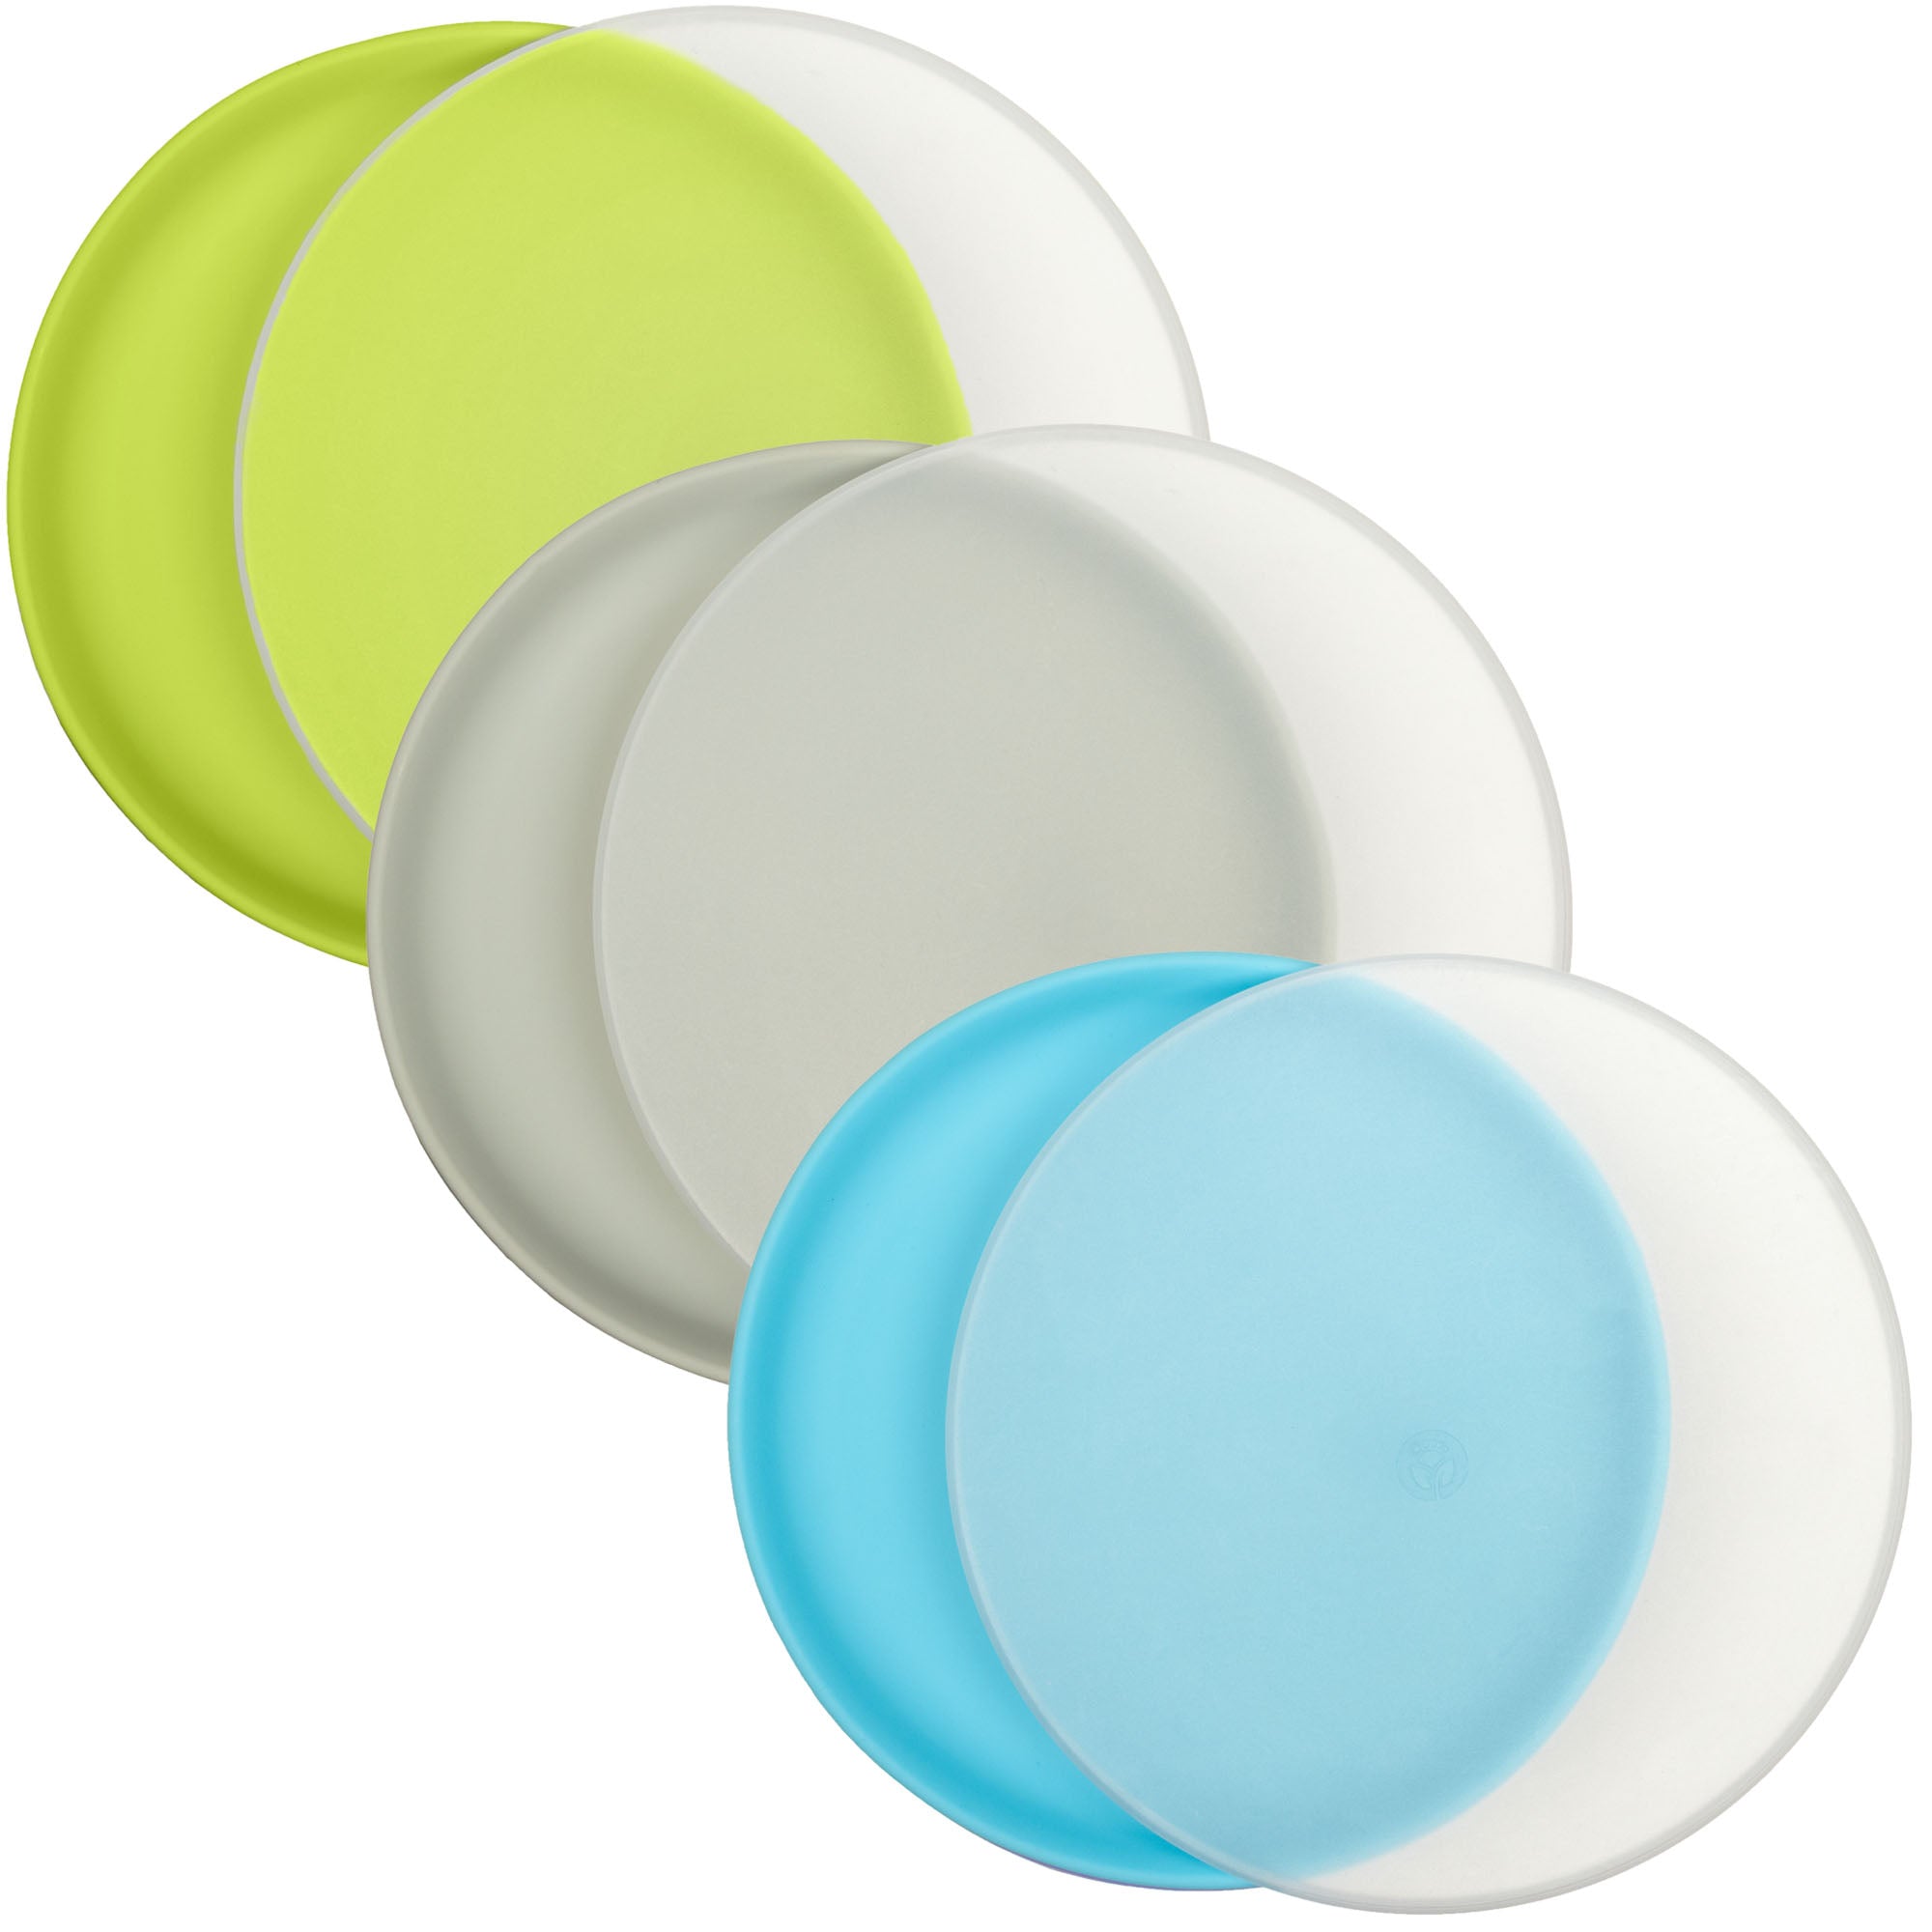 WeeSprout Baby & Toddler Plates with Lids, 100% Food Grade Silicone Plates, Premium Hard Plastic Lids, Unbreakable Design, Microwave & Dishwasher Safe